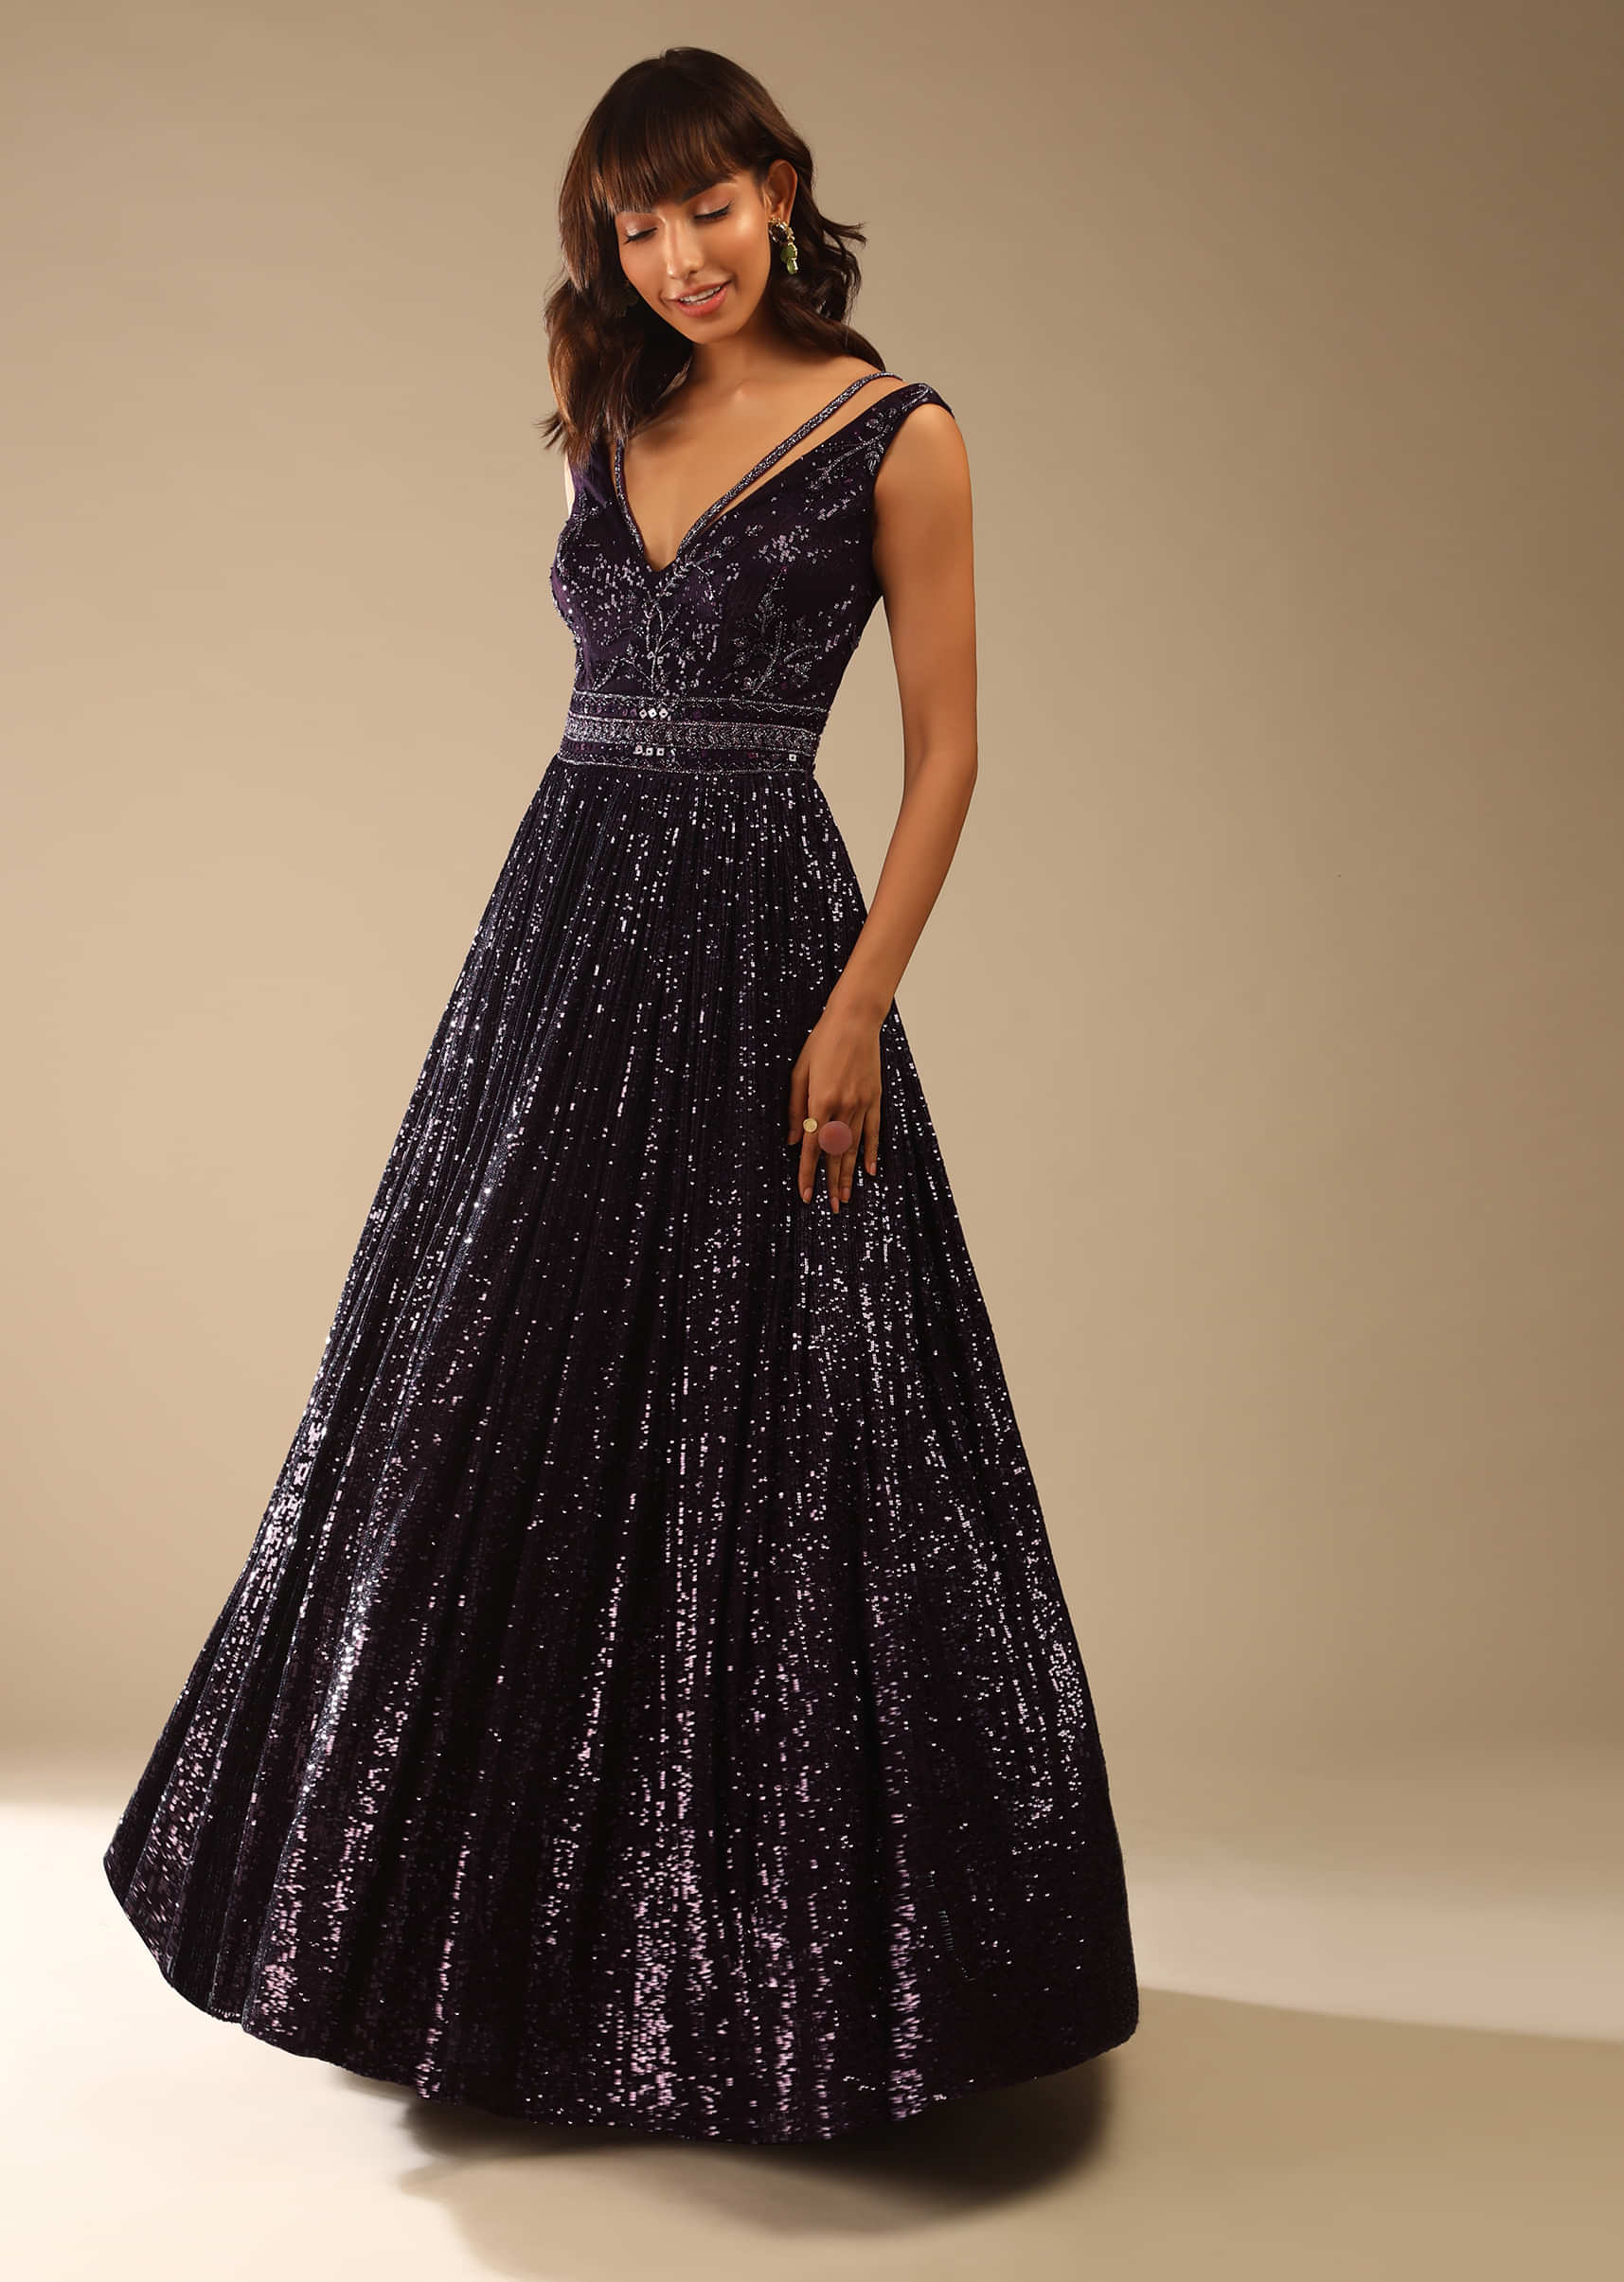 Wine Purple Gown Embellished In Sequins With Cut Dana Work And Deep V Neckline